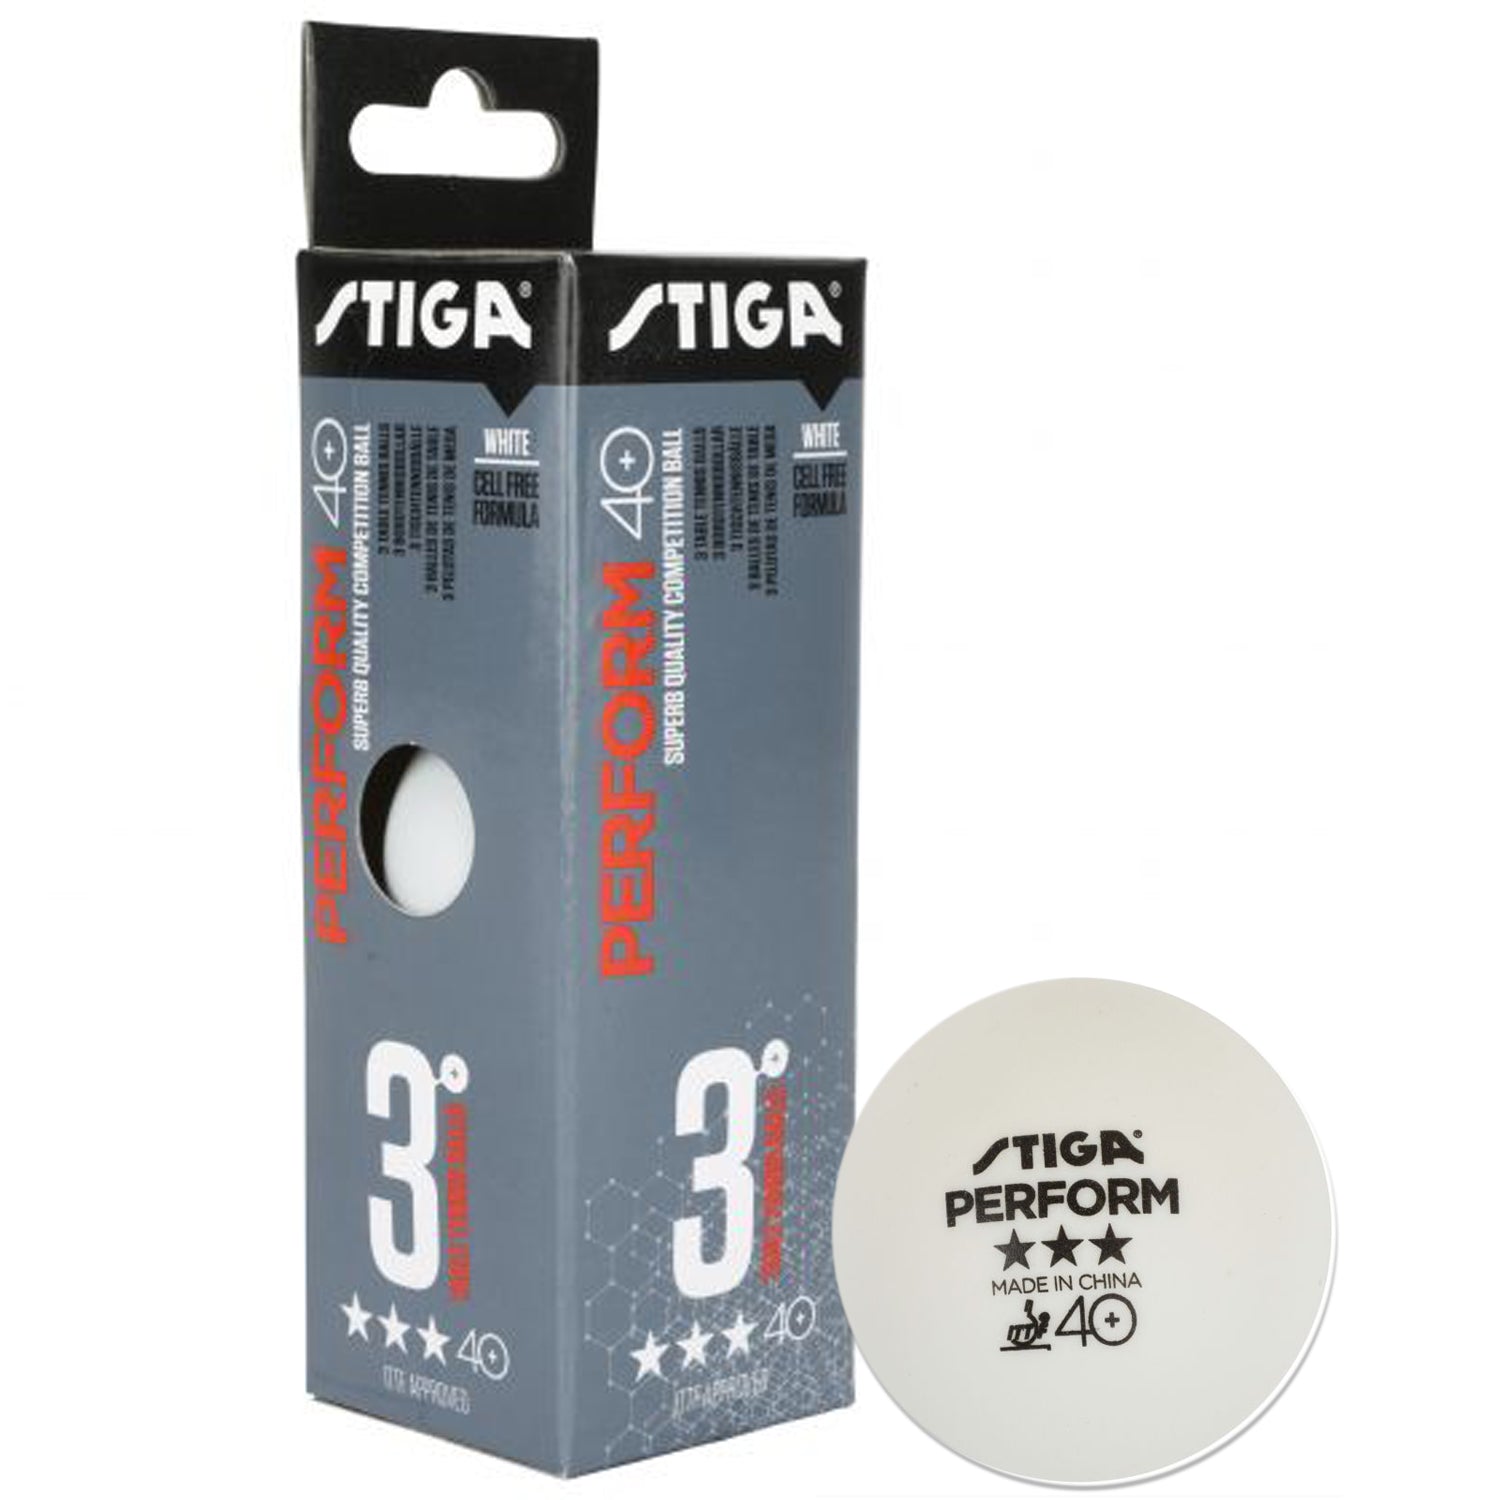 stag table tennis balls online